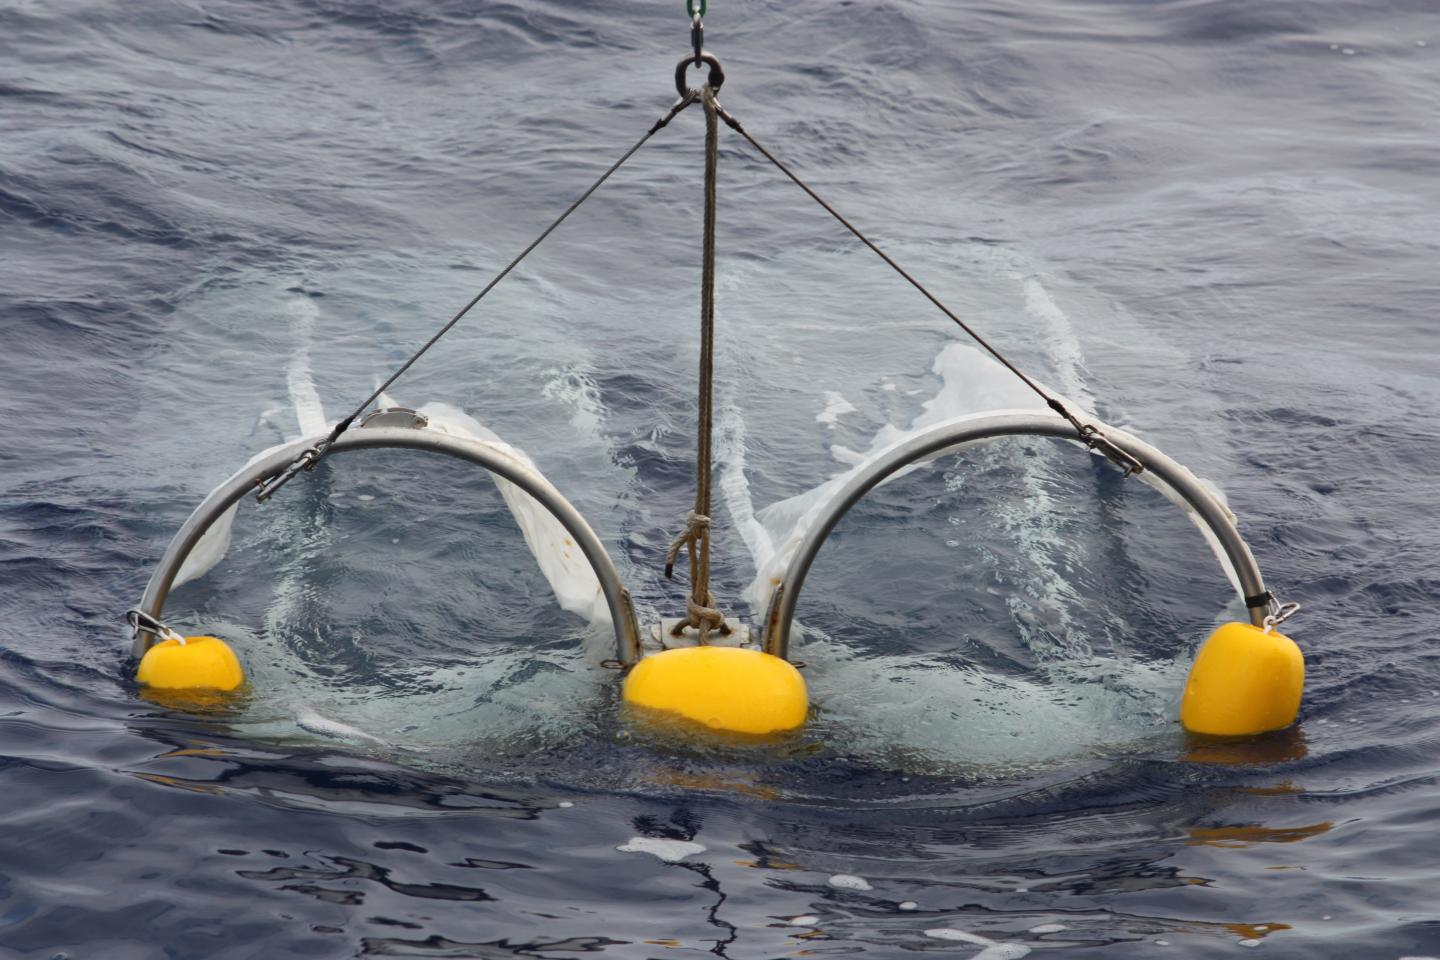 File: Nets deployed by the Tara schooner that is a part of the global Tara Oceans Consortium study, which was a source for the 35,000 water samples collected for the study